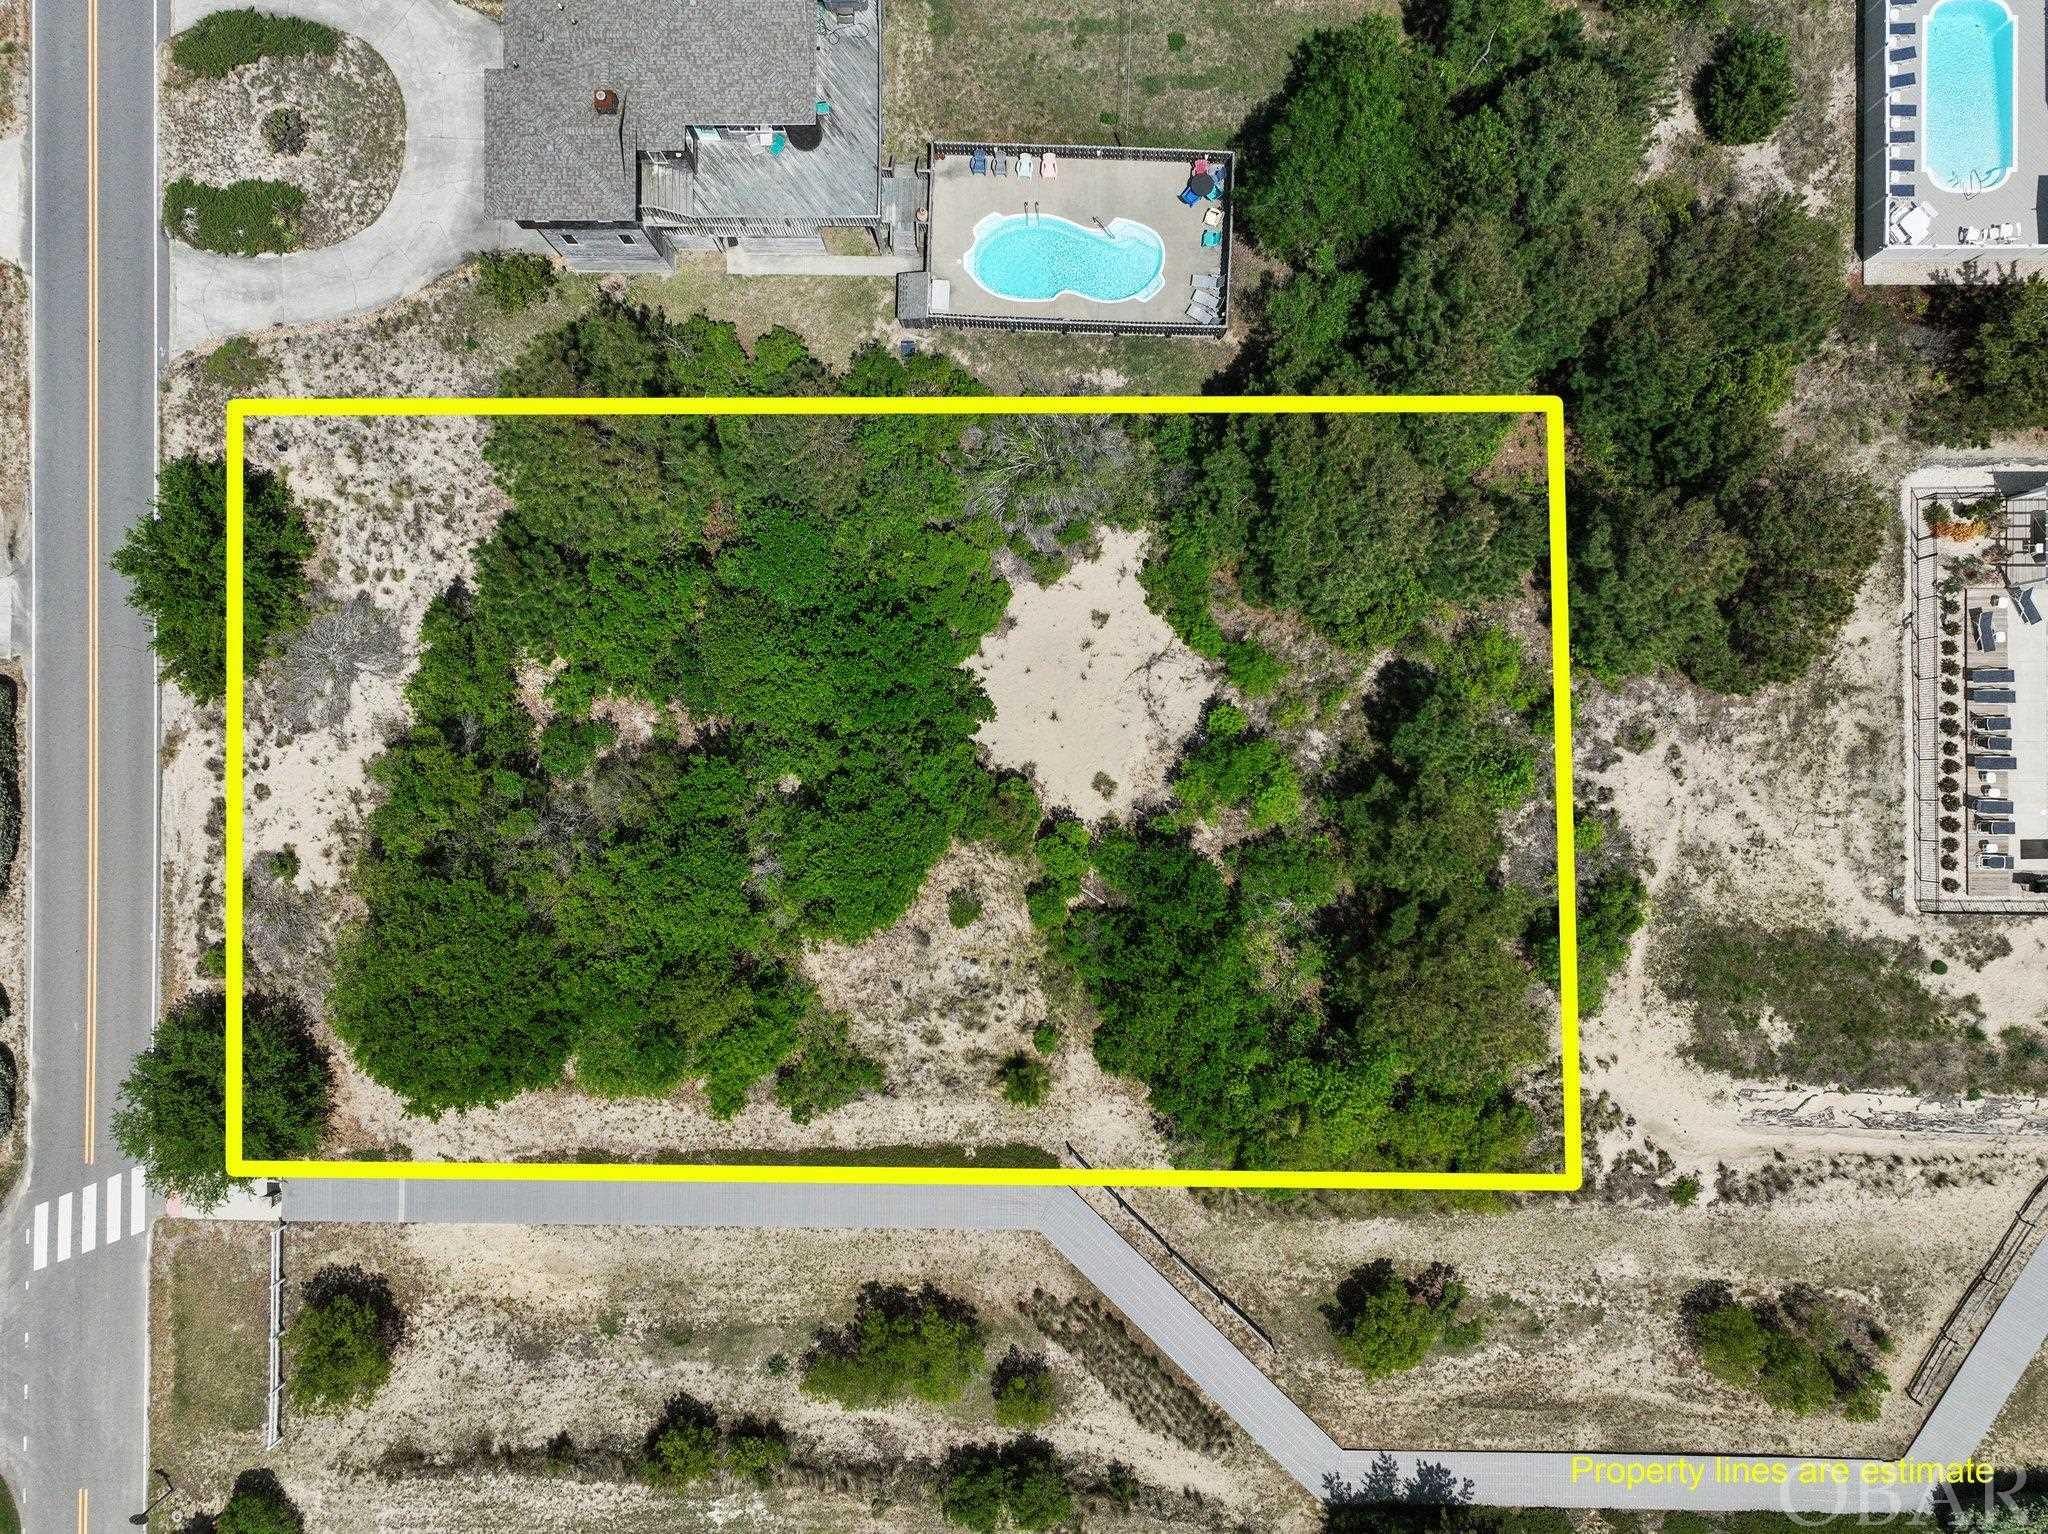 Large, fifth row home site adjacent to the Herring St beach access, a prime location for building your dream home or income producing vacation rental.  Conveniently located for a straight shot to the beach or a quick car/bike ride to the shopping, restaurants and attractions of Corolla.  This X flood zone lot is 22,000 square feet of potential opportunity in one of the most popular neighborhoods of the northern beaches.  Water tap has been paid.